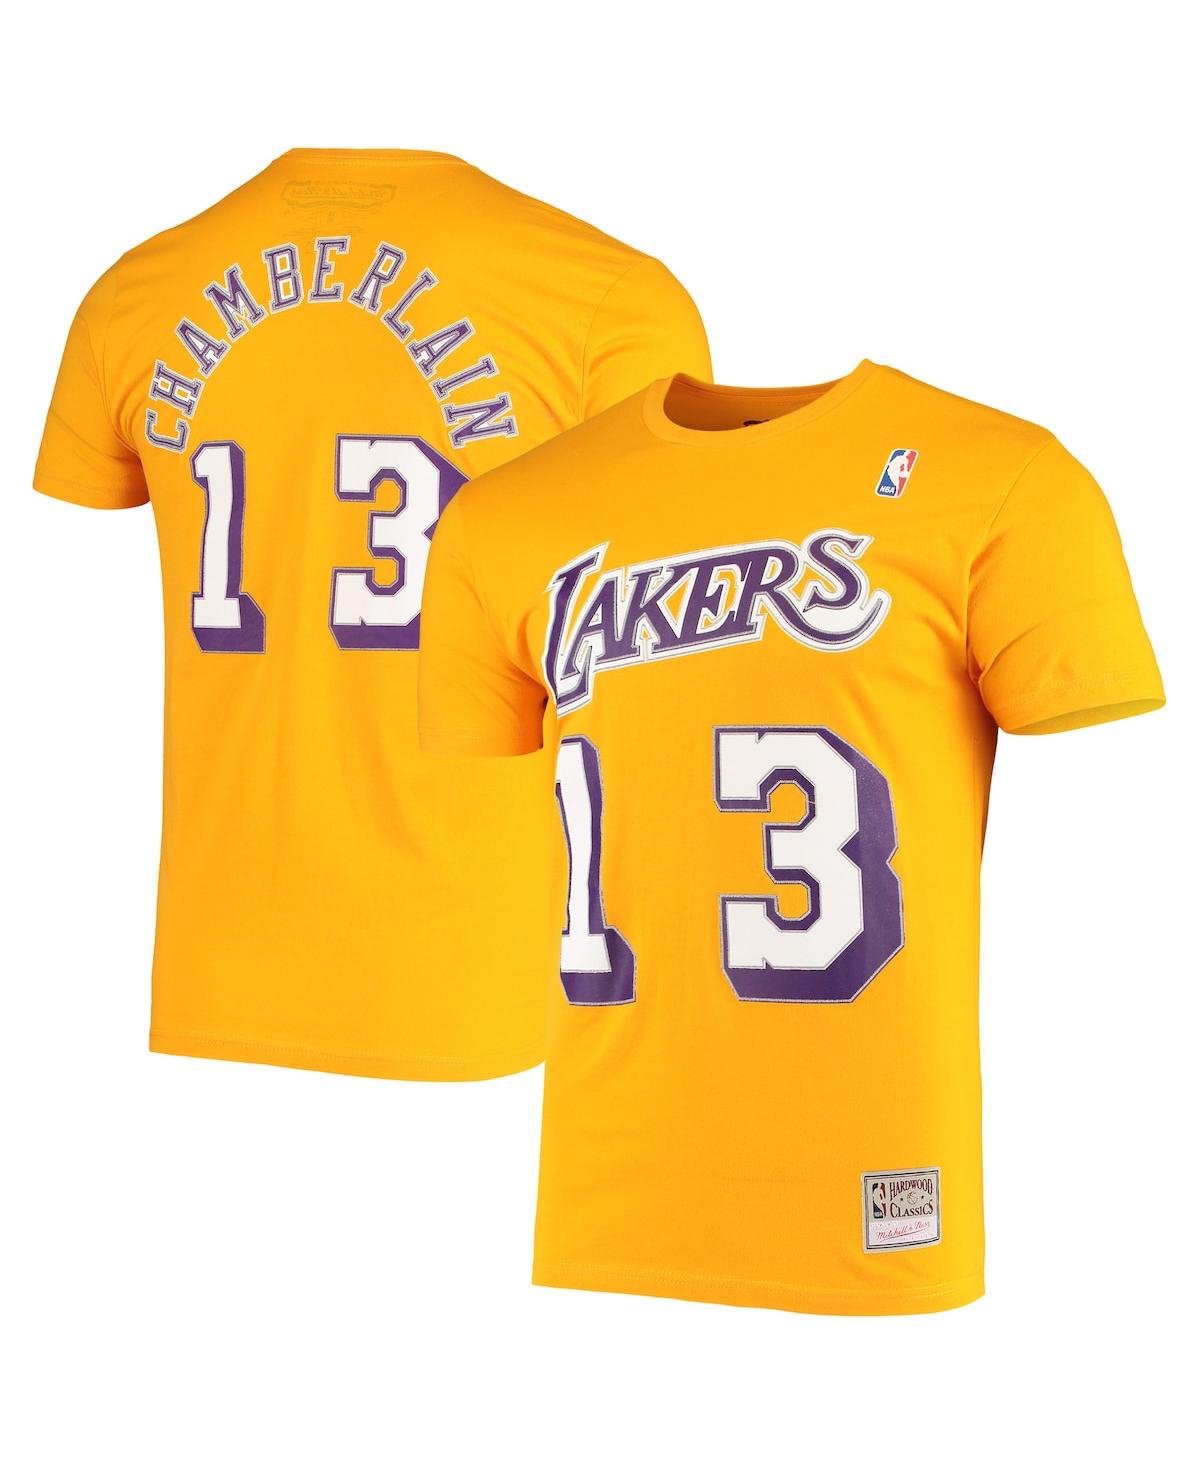 Men's Mitchell & Ness Wilt Chamberlain Gold Los Angeles Lakers Hardwood Classics Stitch Name and Number T-shirt - Gold